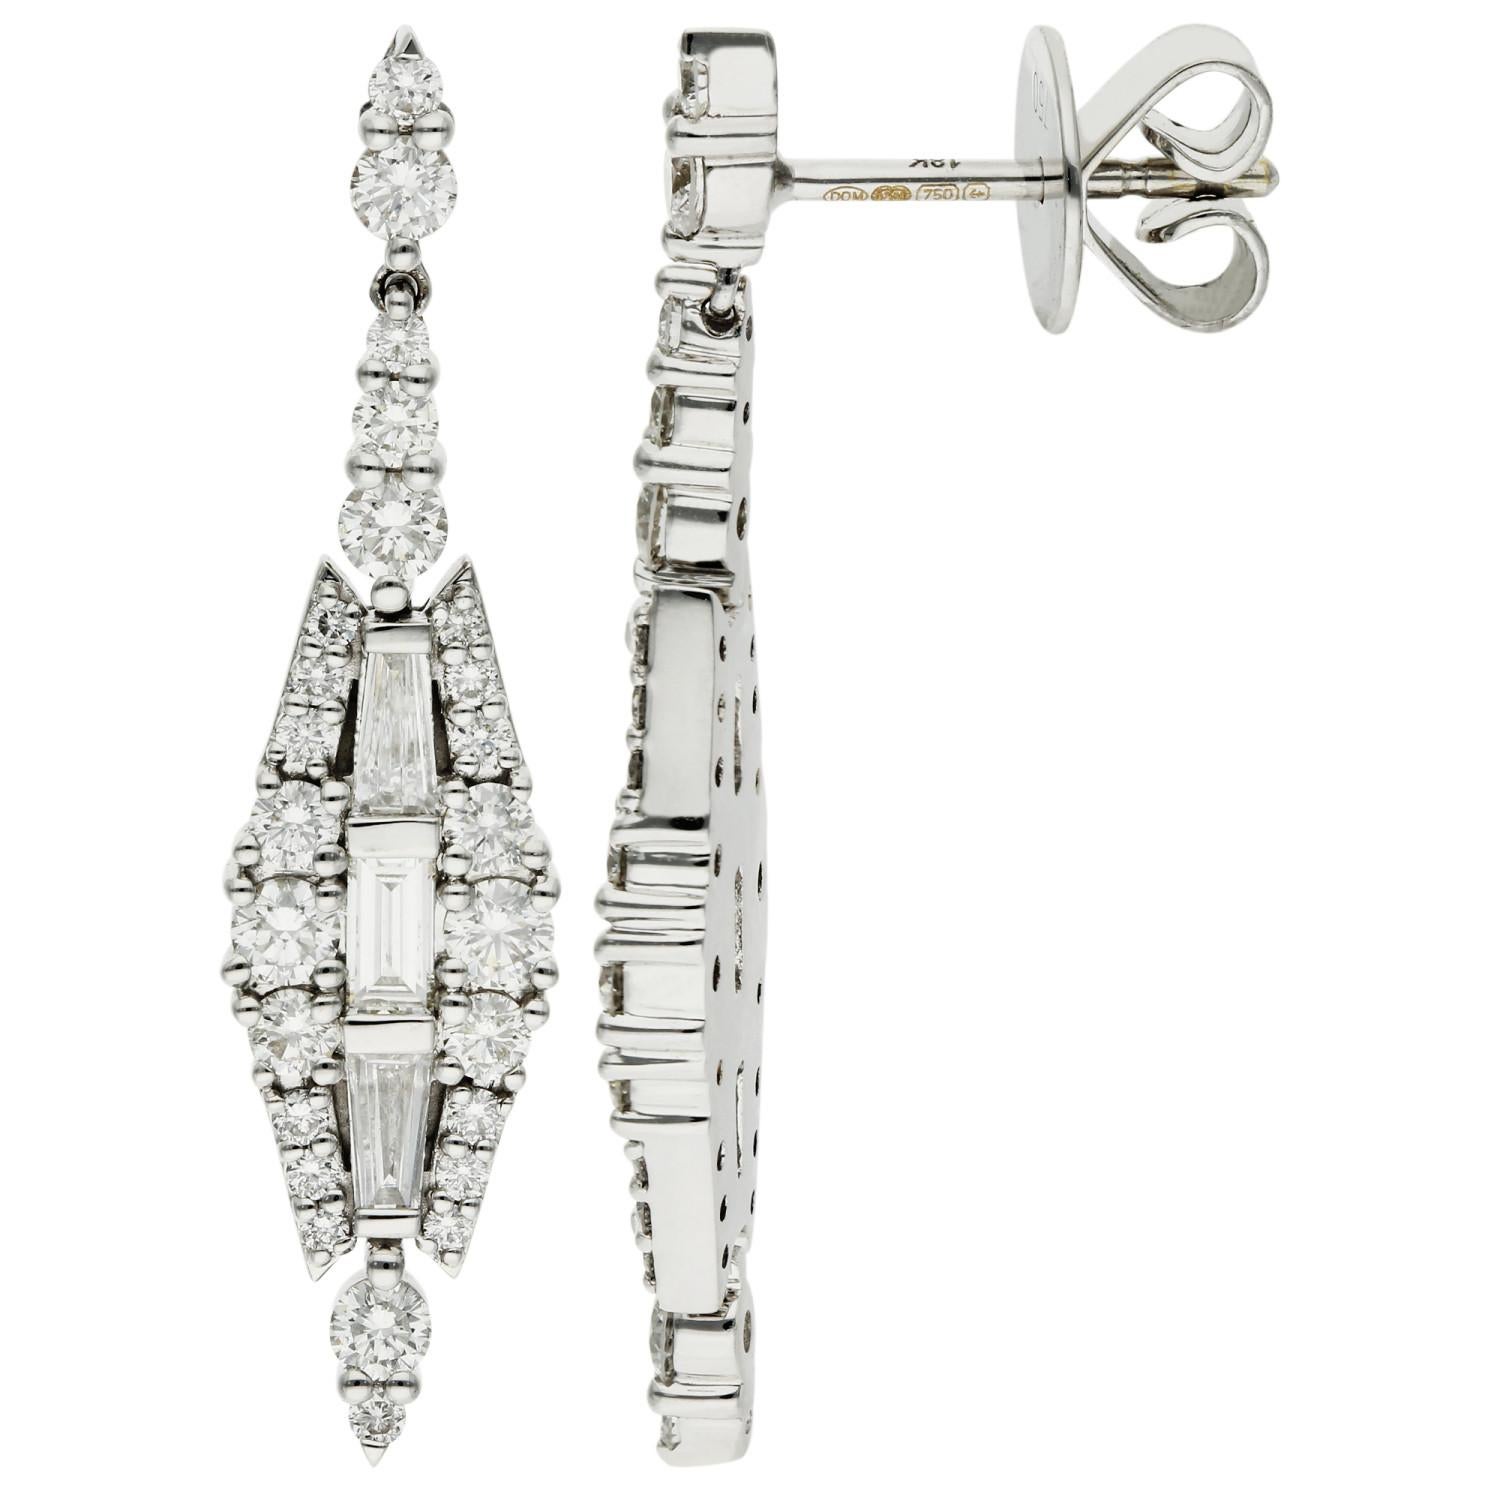 Elevate your elegance with our stunning 18ct White Gold Diamond Drop Earrings, a masterpiece of craftsmanship and style. These exquisite earrings feature a dazzling display of graduated round brilliant cut diamonds, artfully arranged to frame a